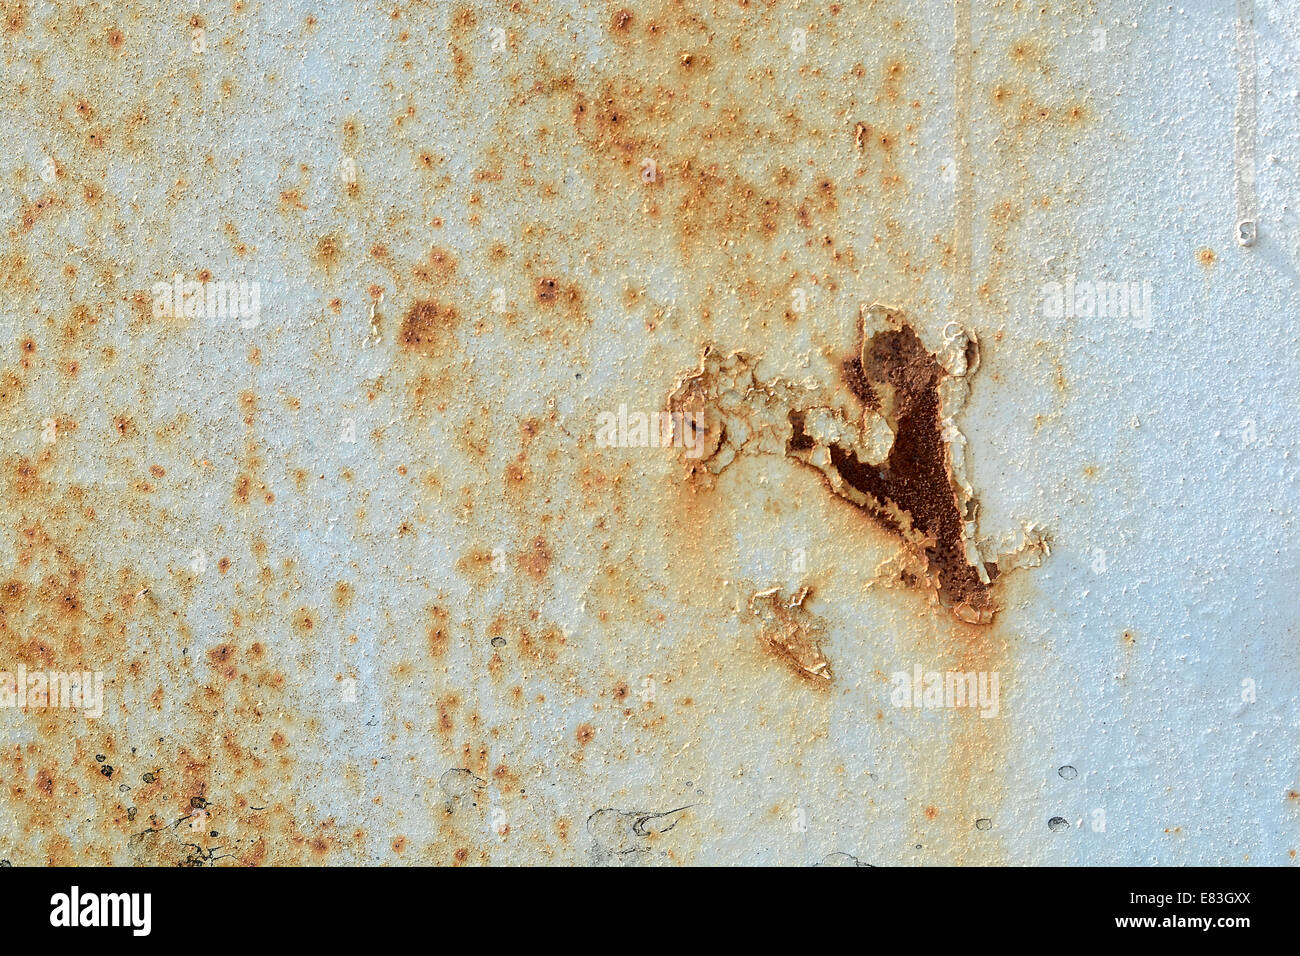 scratched ripped metal plating, grunge background Stock Photo